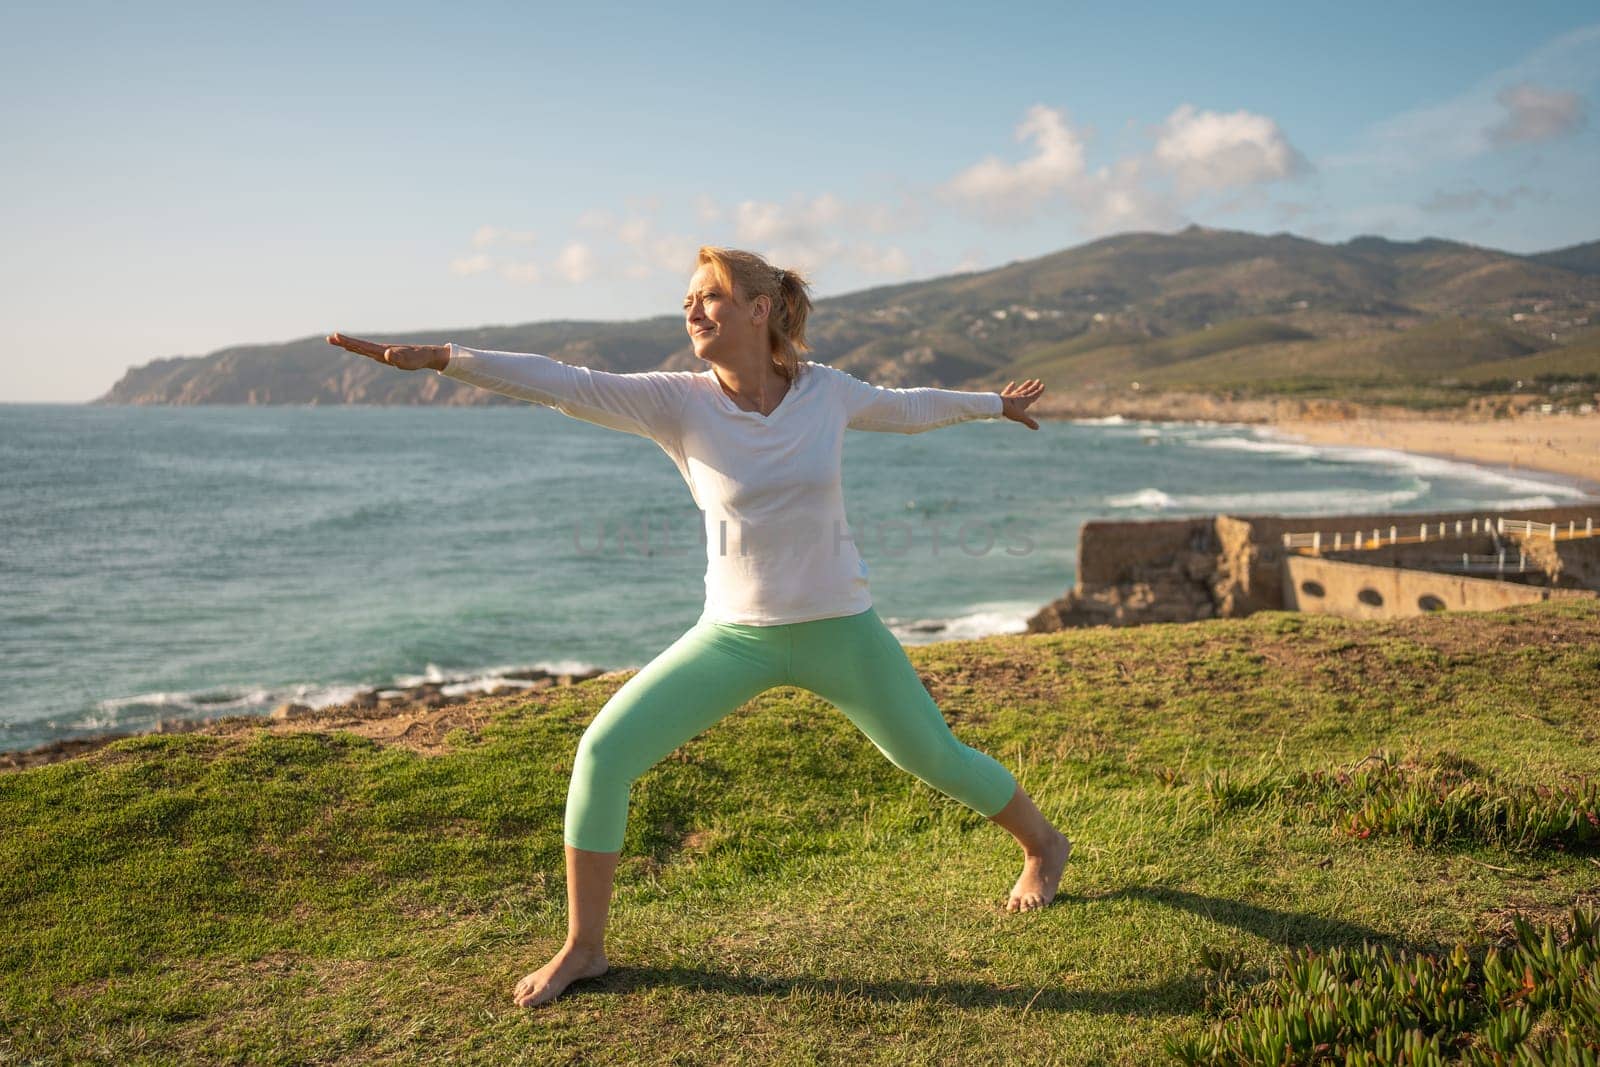 Senior woman practicing yoga on coast. Female standing in warrior position on sea shore with an ancient fortress on background. Mature woman barefoot doing workout near medieval fortification on ocean beach.